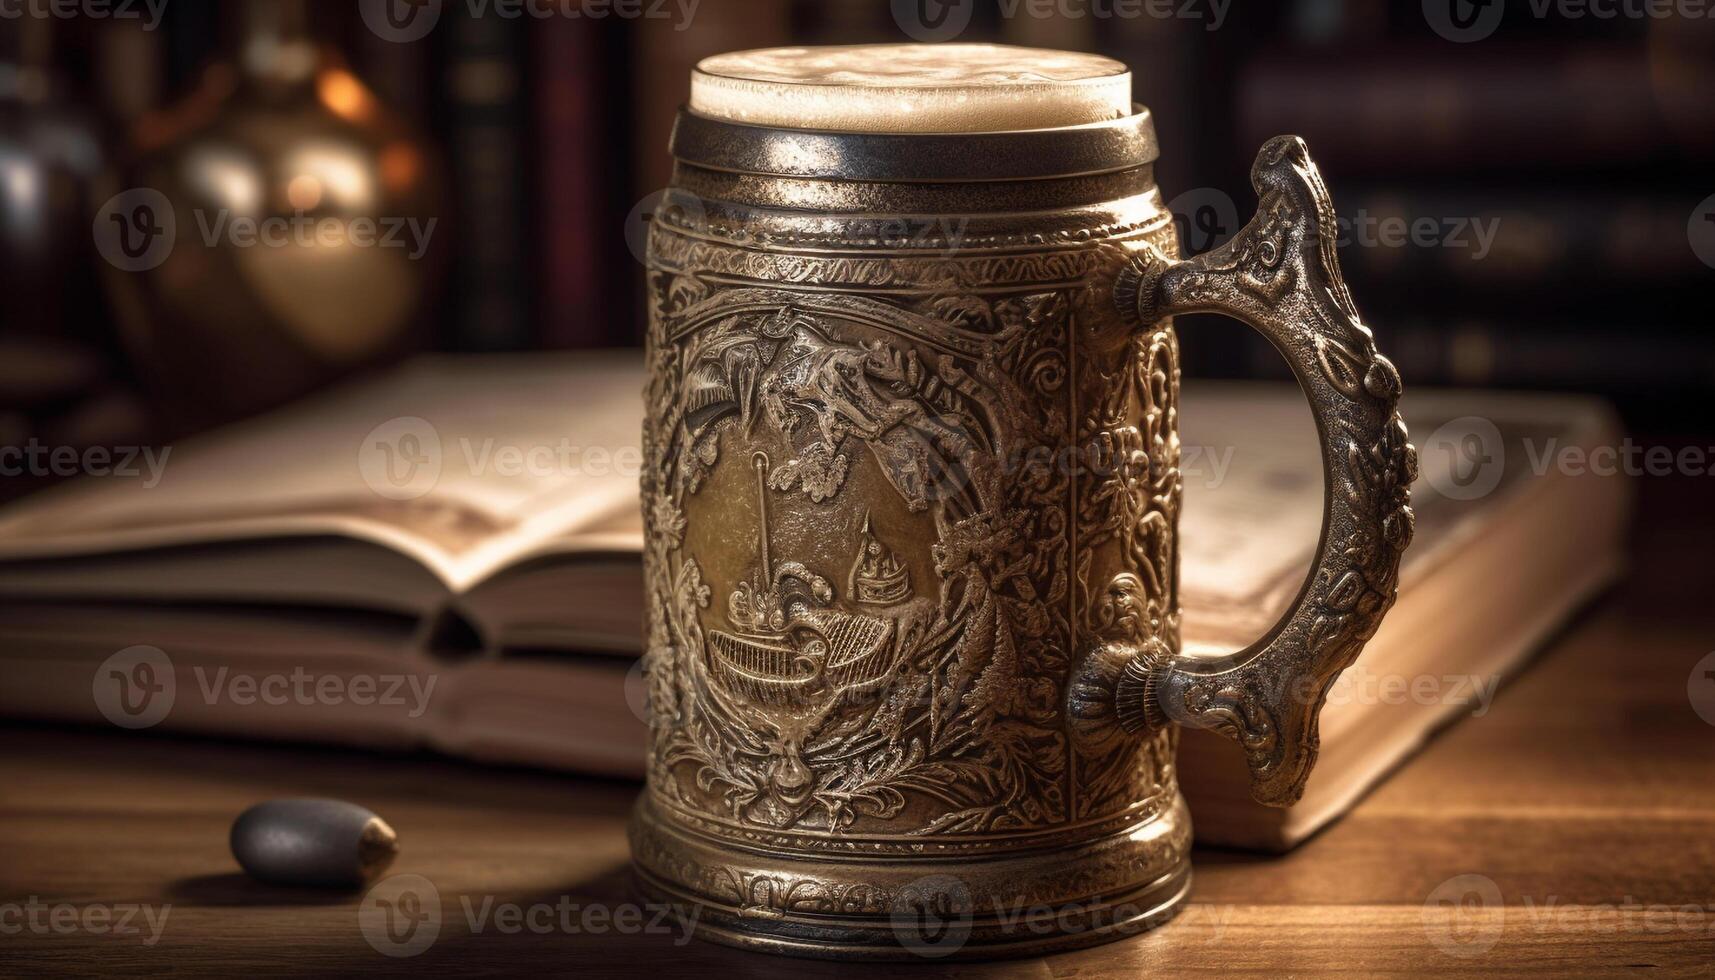 Antique book on rustic table with mug and wood background generated by AI photo